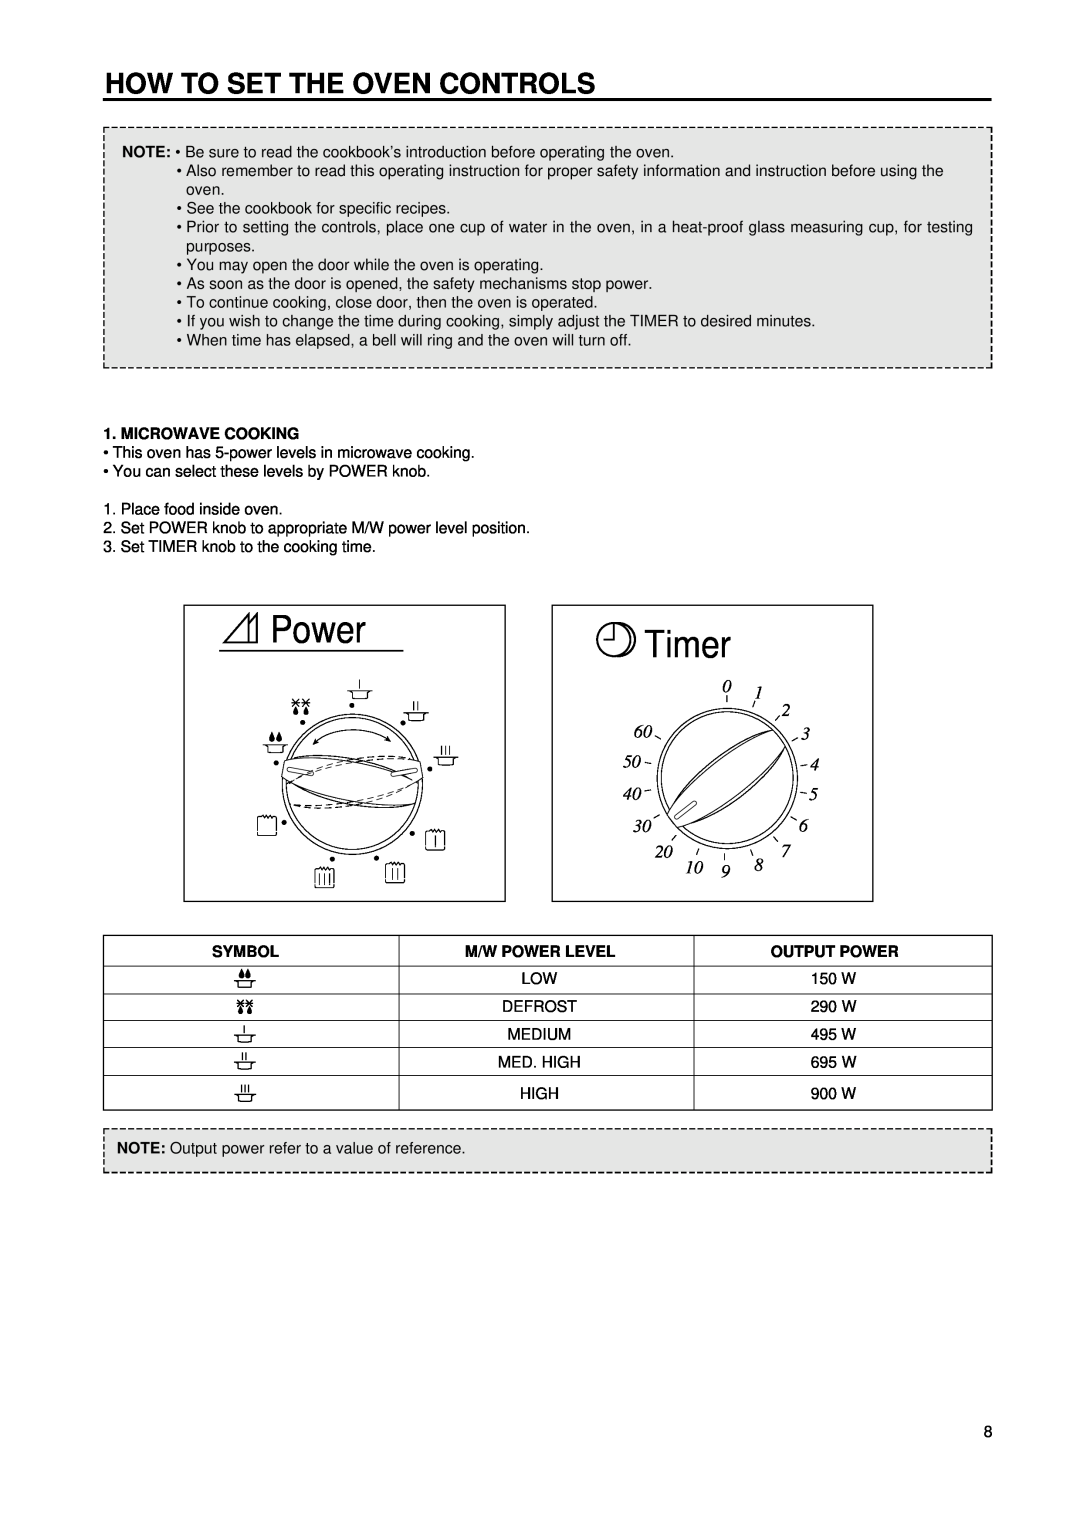 Daewoo KOG-8755 manual Timer, How To Set The Oven Controls, 306, Microwave Cooking, Symbol, Output Power 